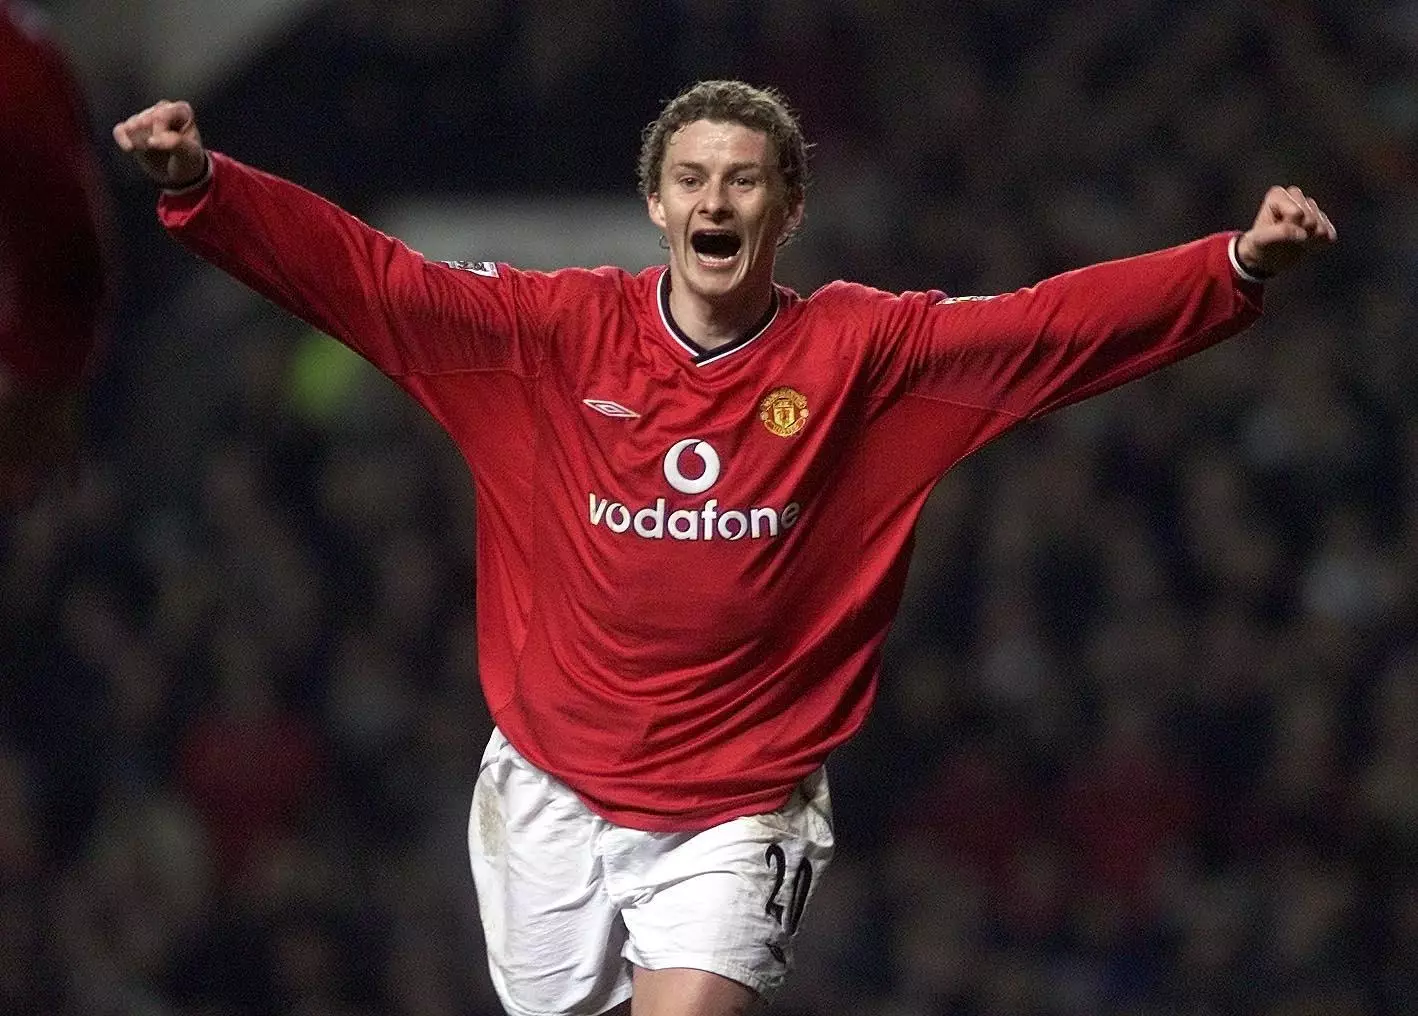 The club means a lot to Solskjaer. Image: PA Images